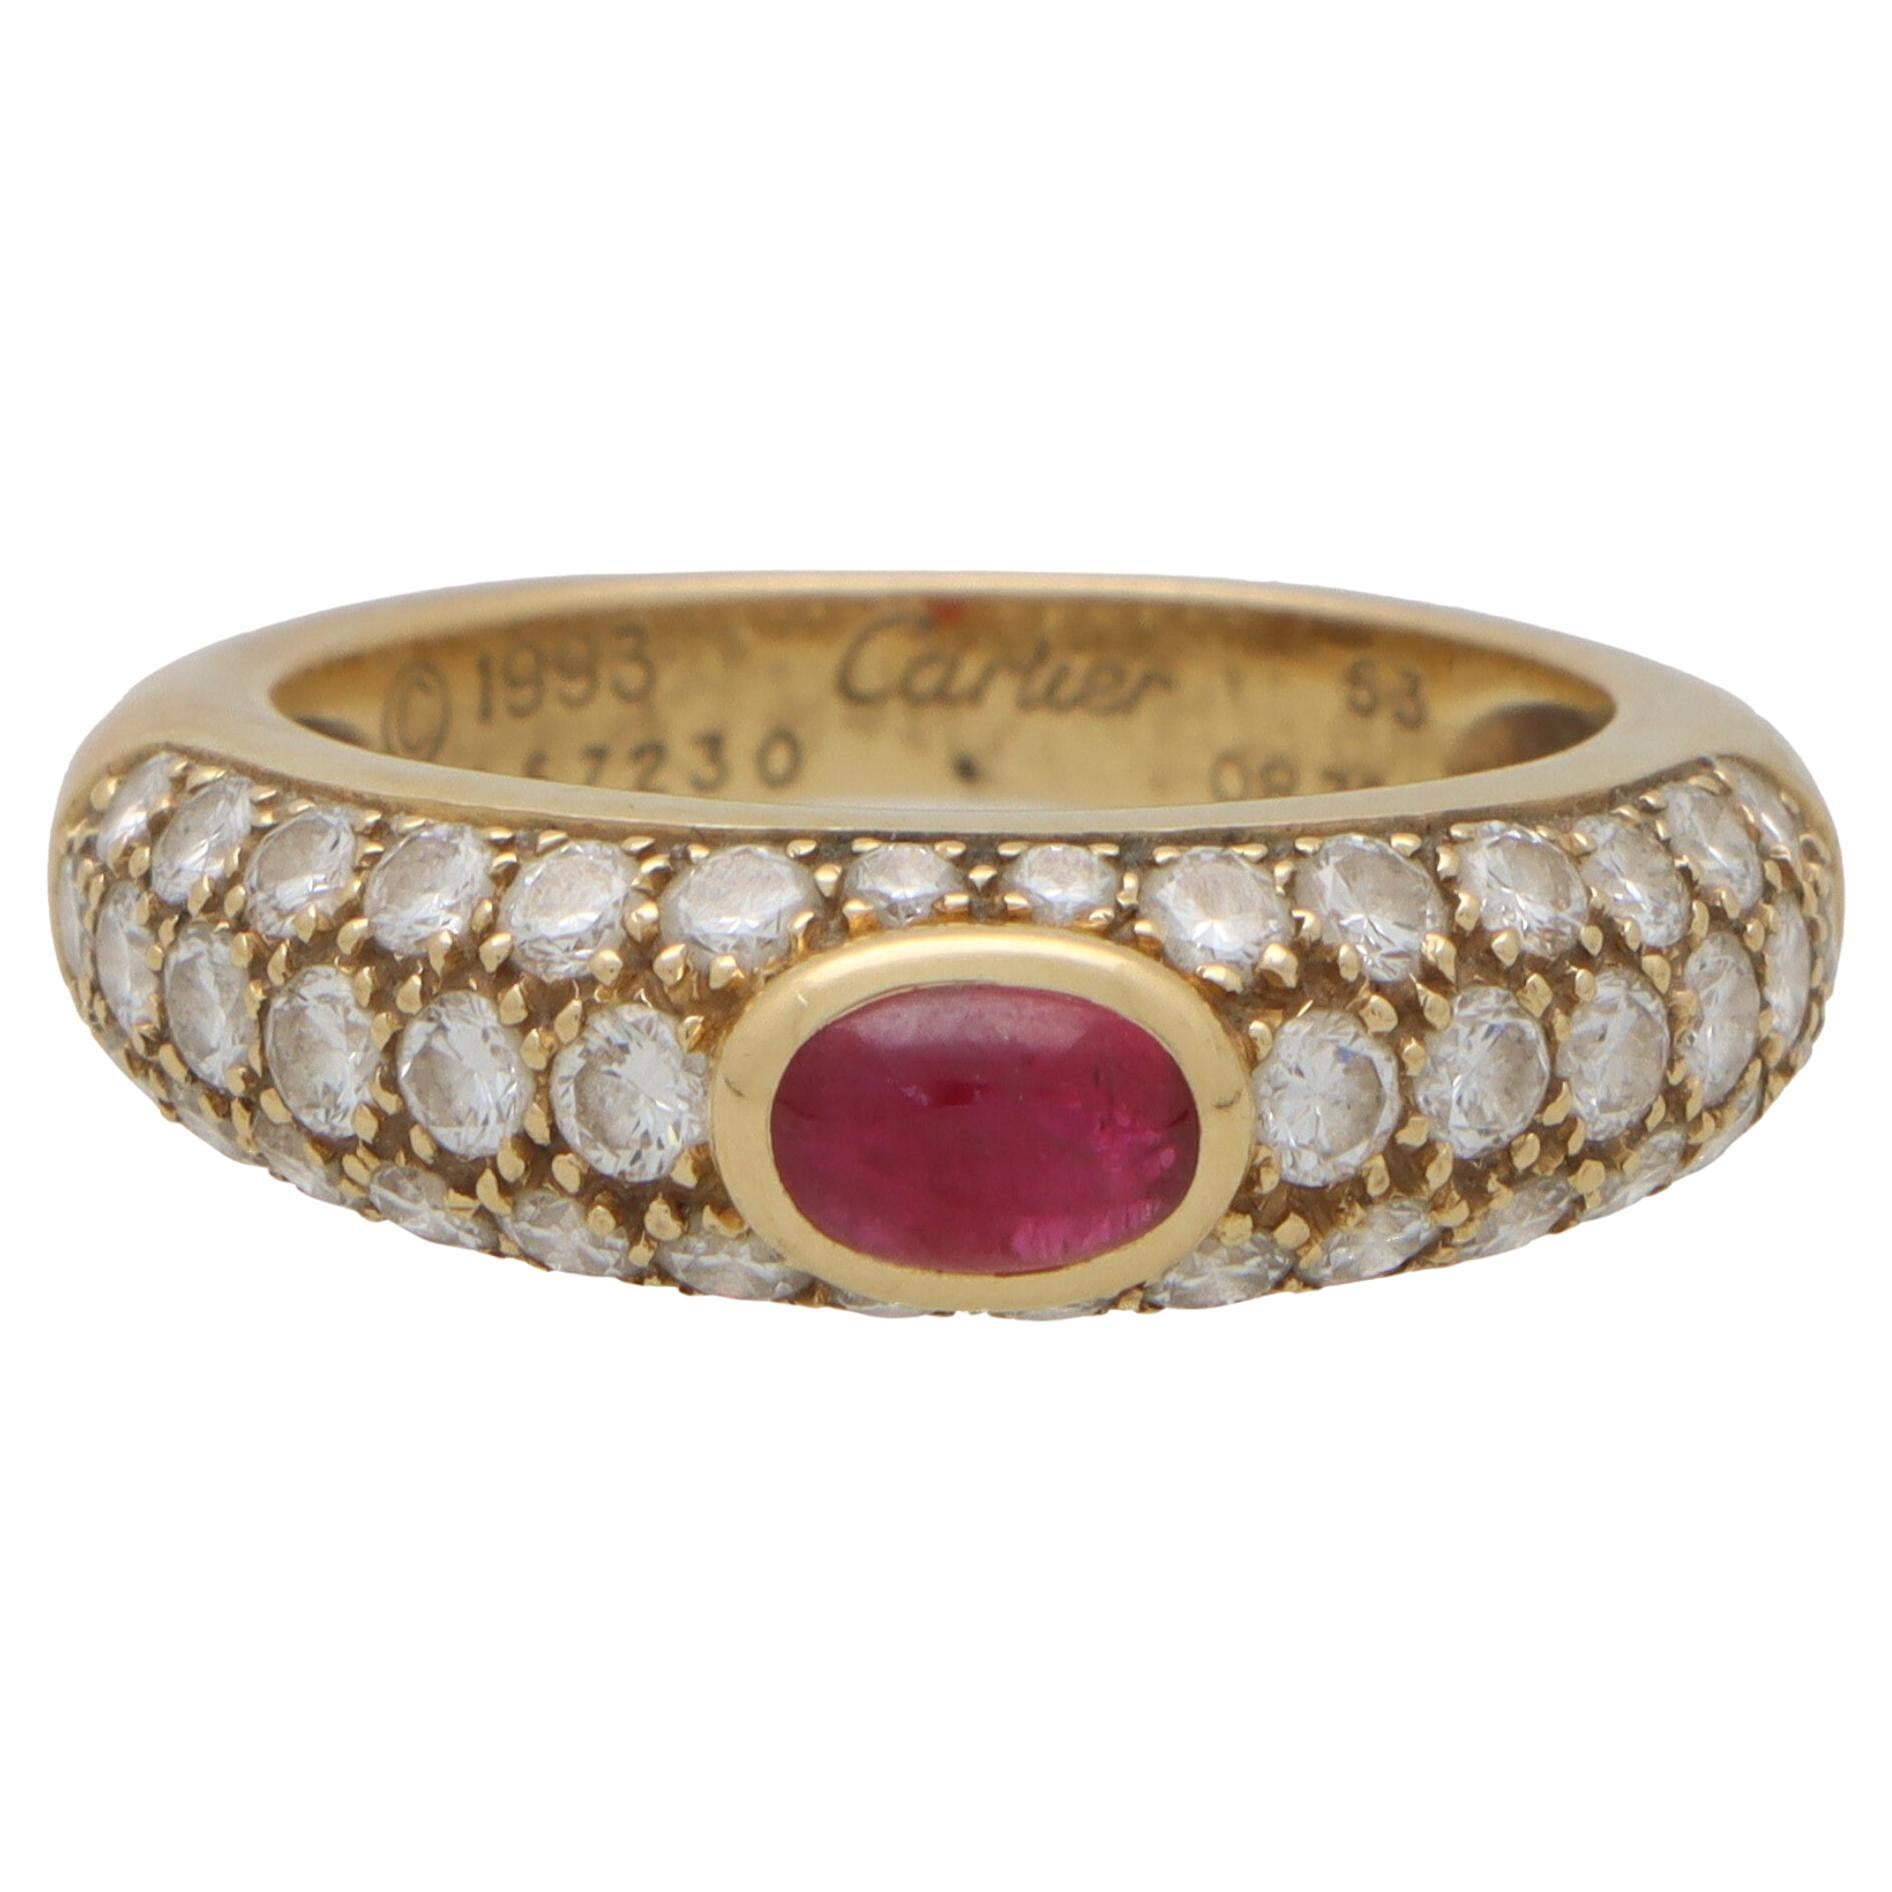 Vintage Cartier Mimi Ruby and Diamond Ring in 18k Yellow Gold For Sale